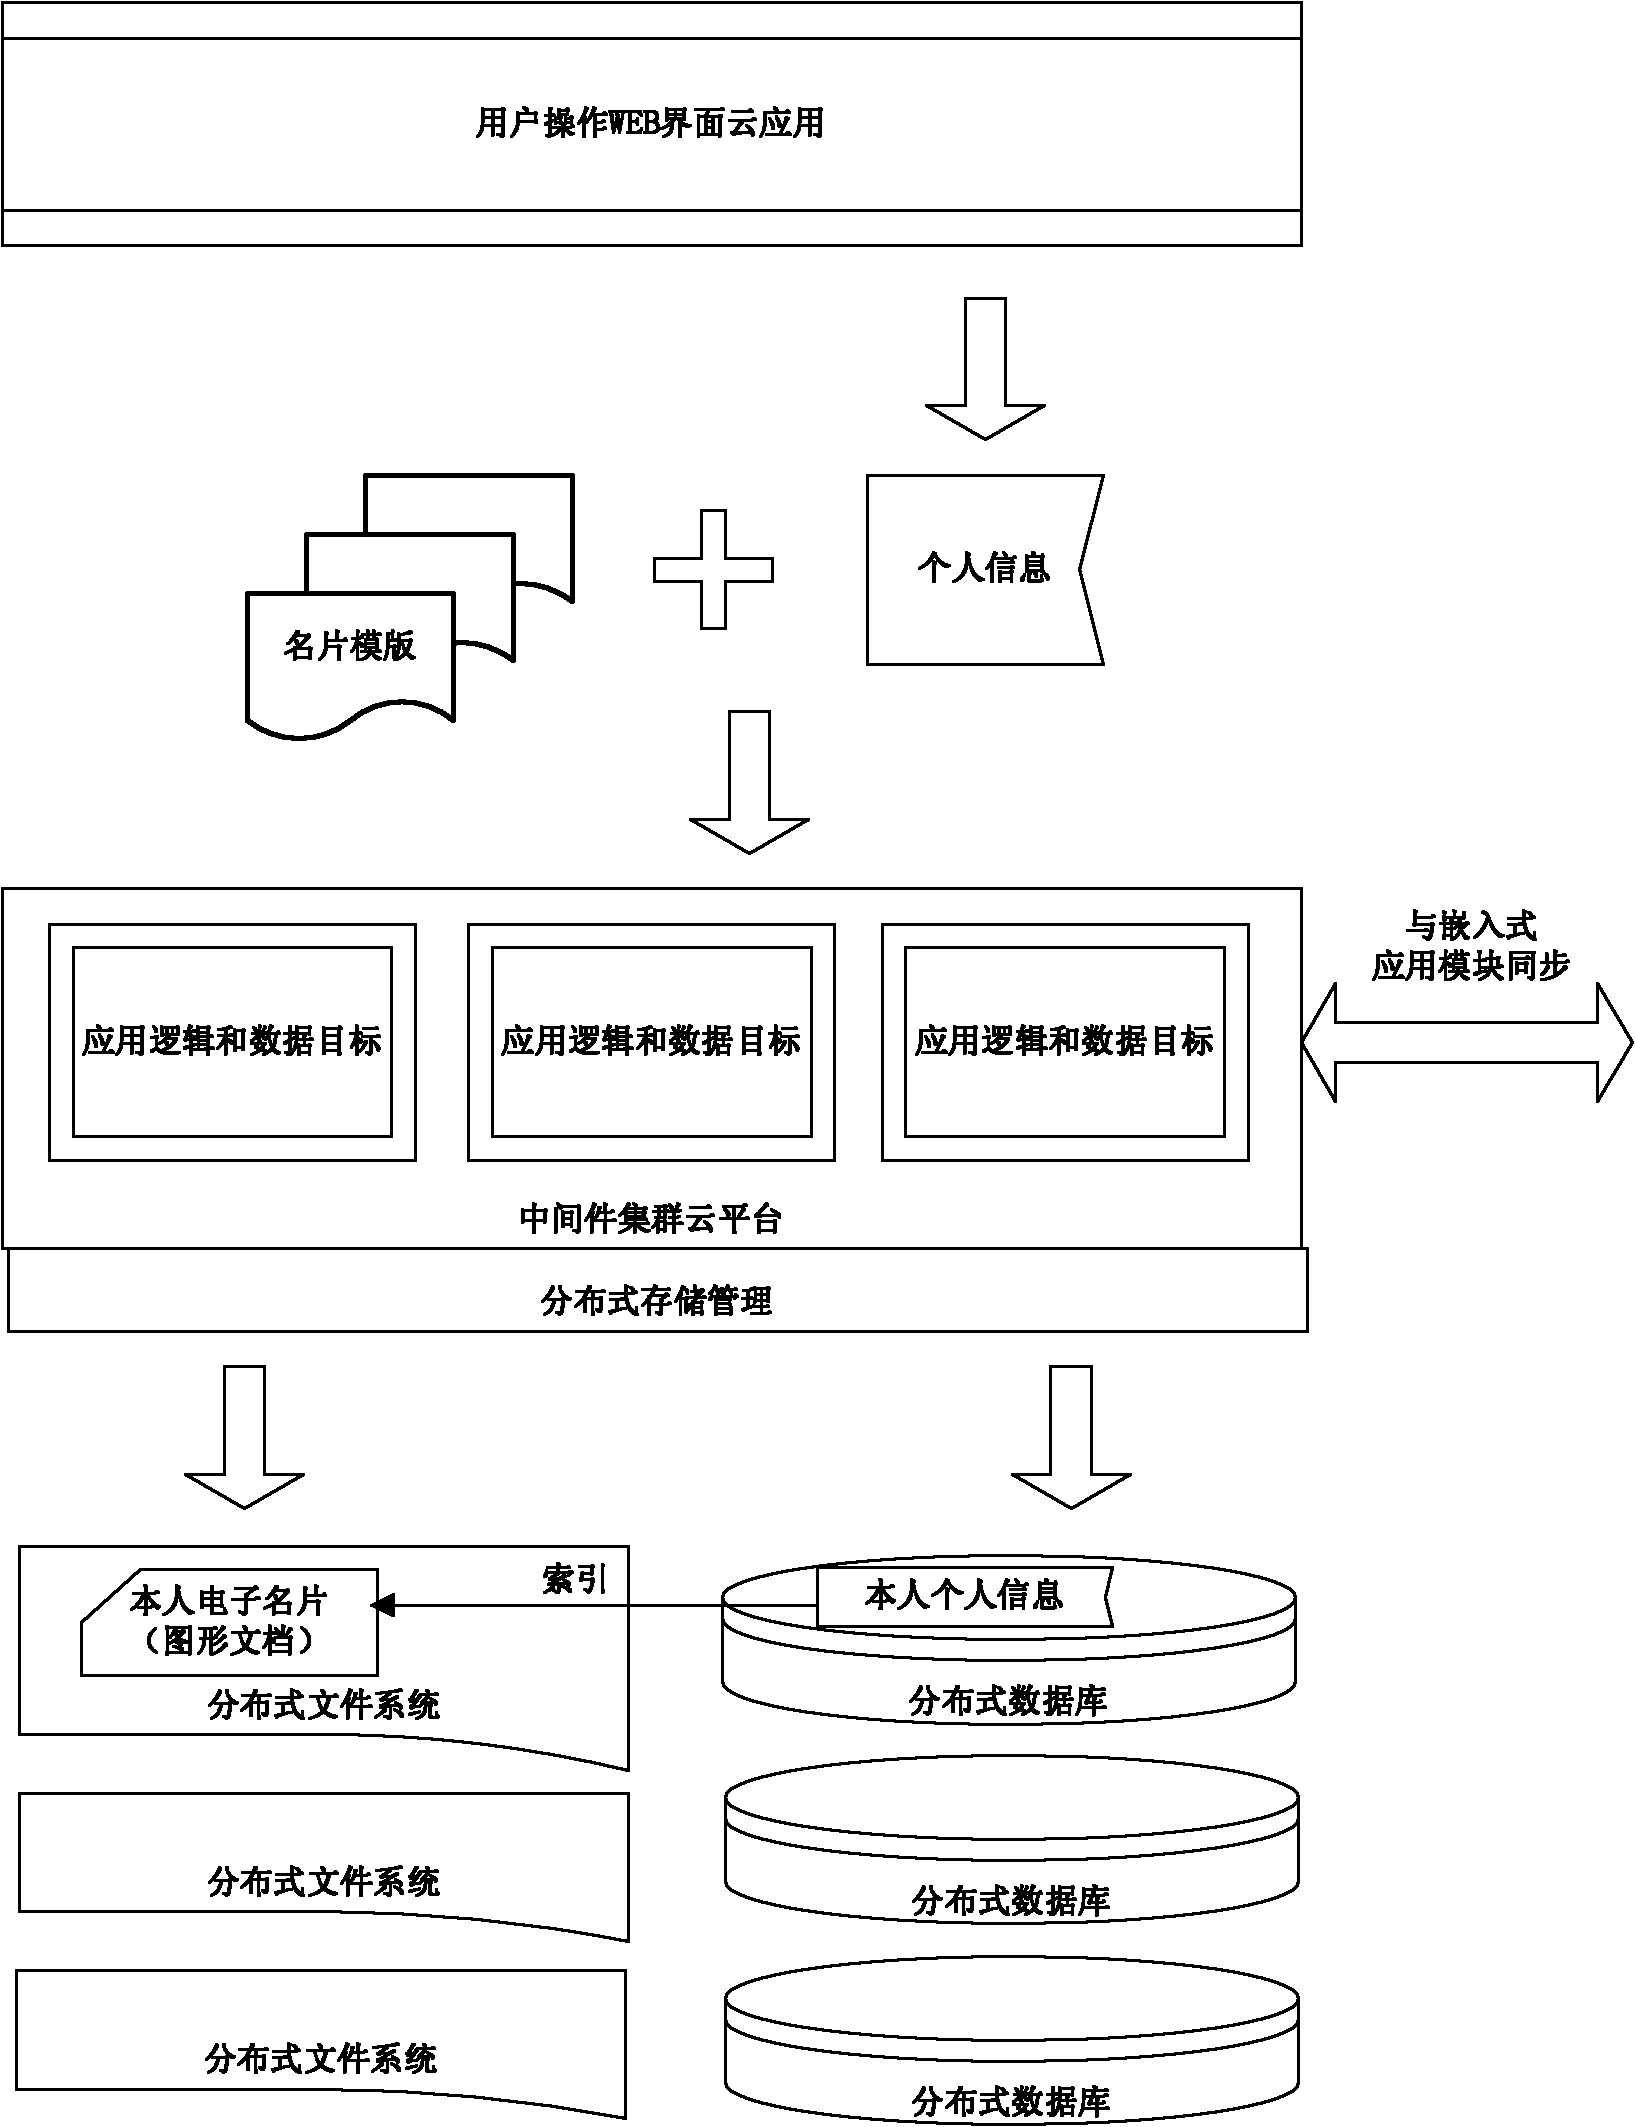 Method and system for storing and managing graphical data and structured data based on cloud storage